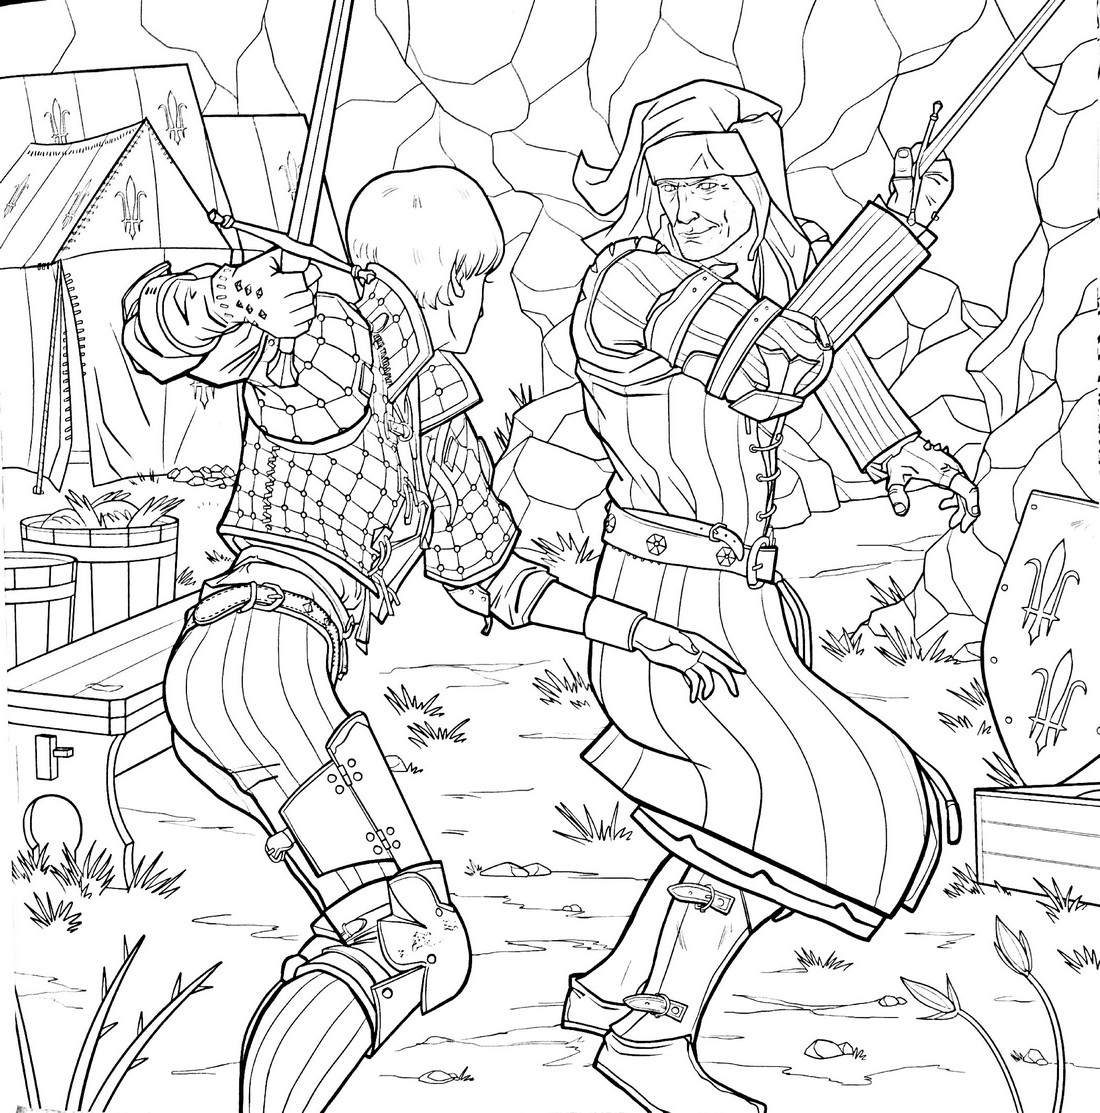 Coloring page Witcher Battle scene